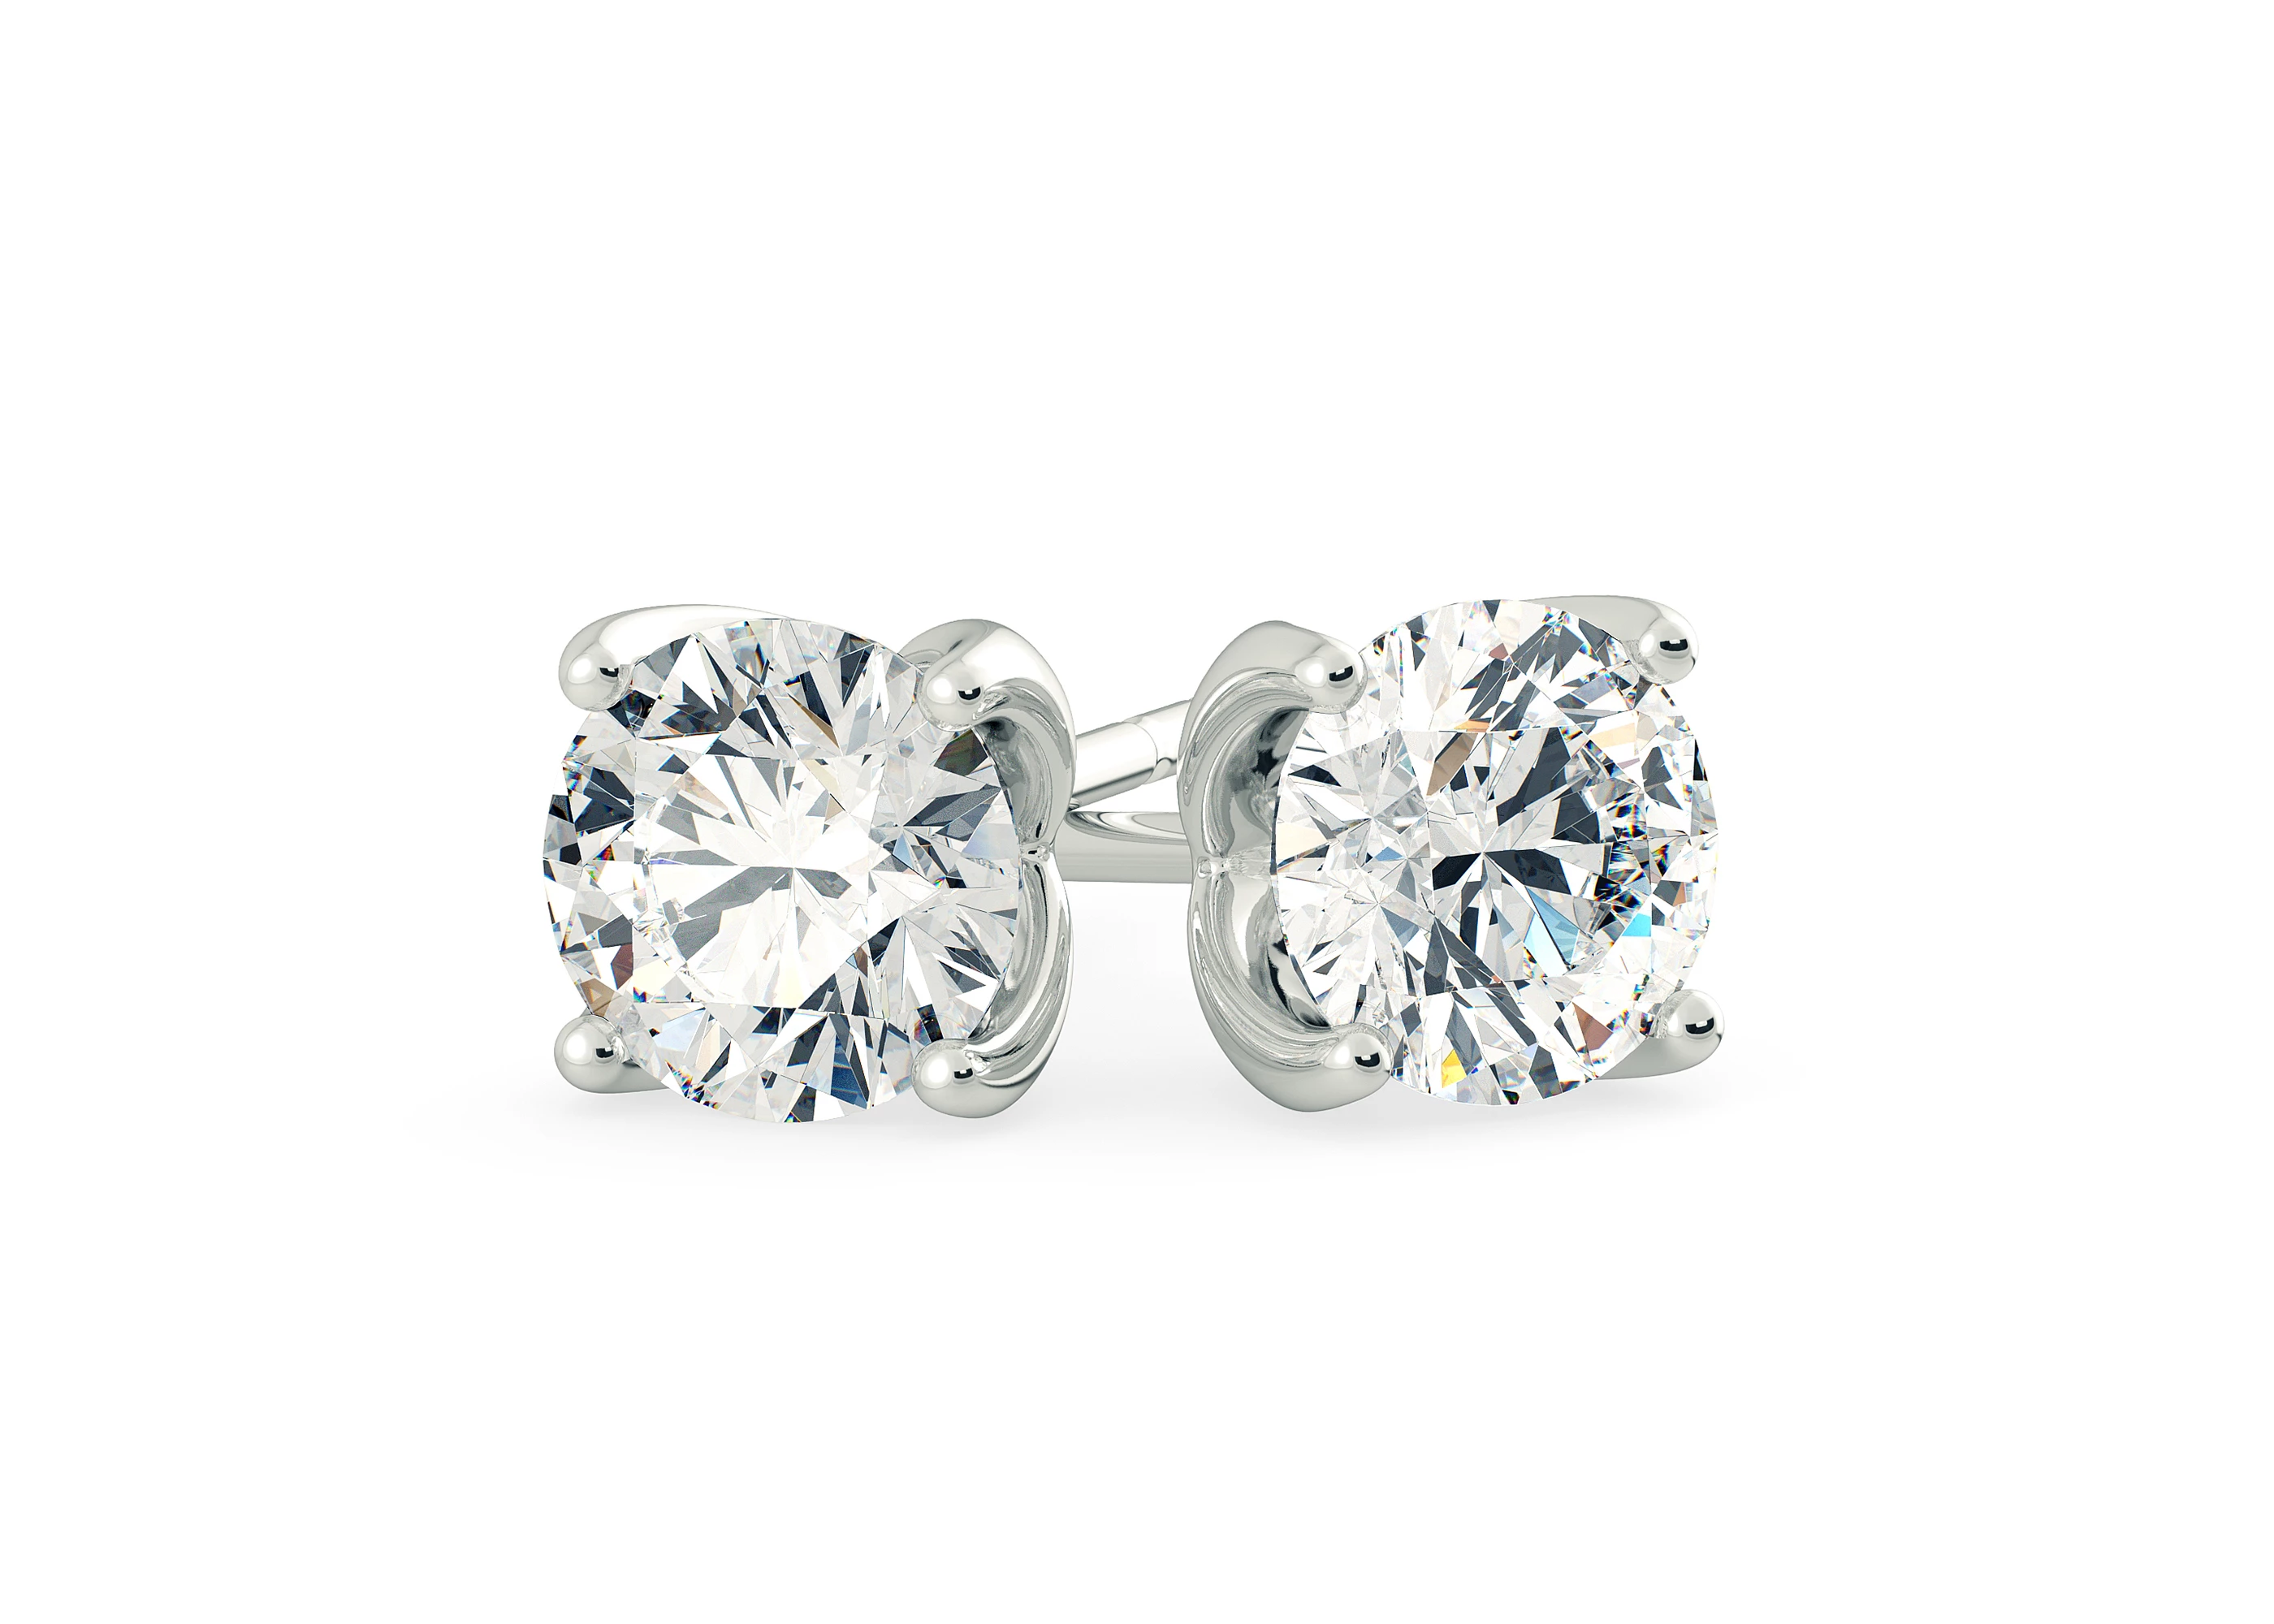 Mirabelle Round Brilliant Diamond Stud Earrings in Platinum with Butterfly Backs